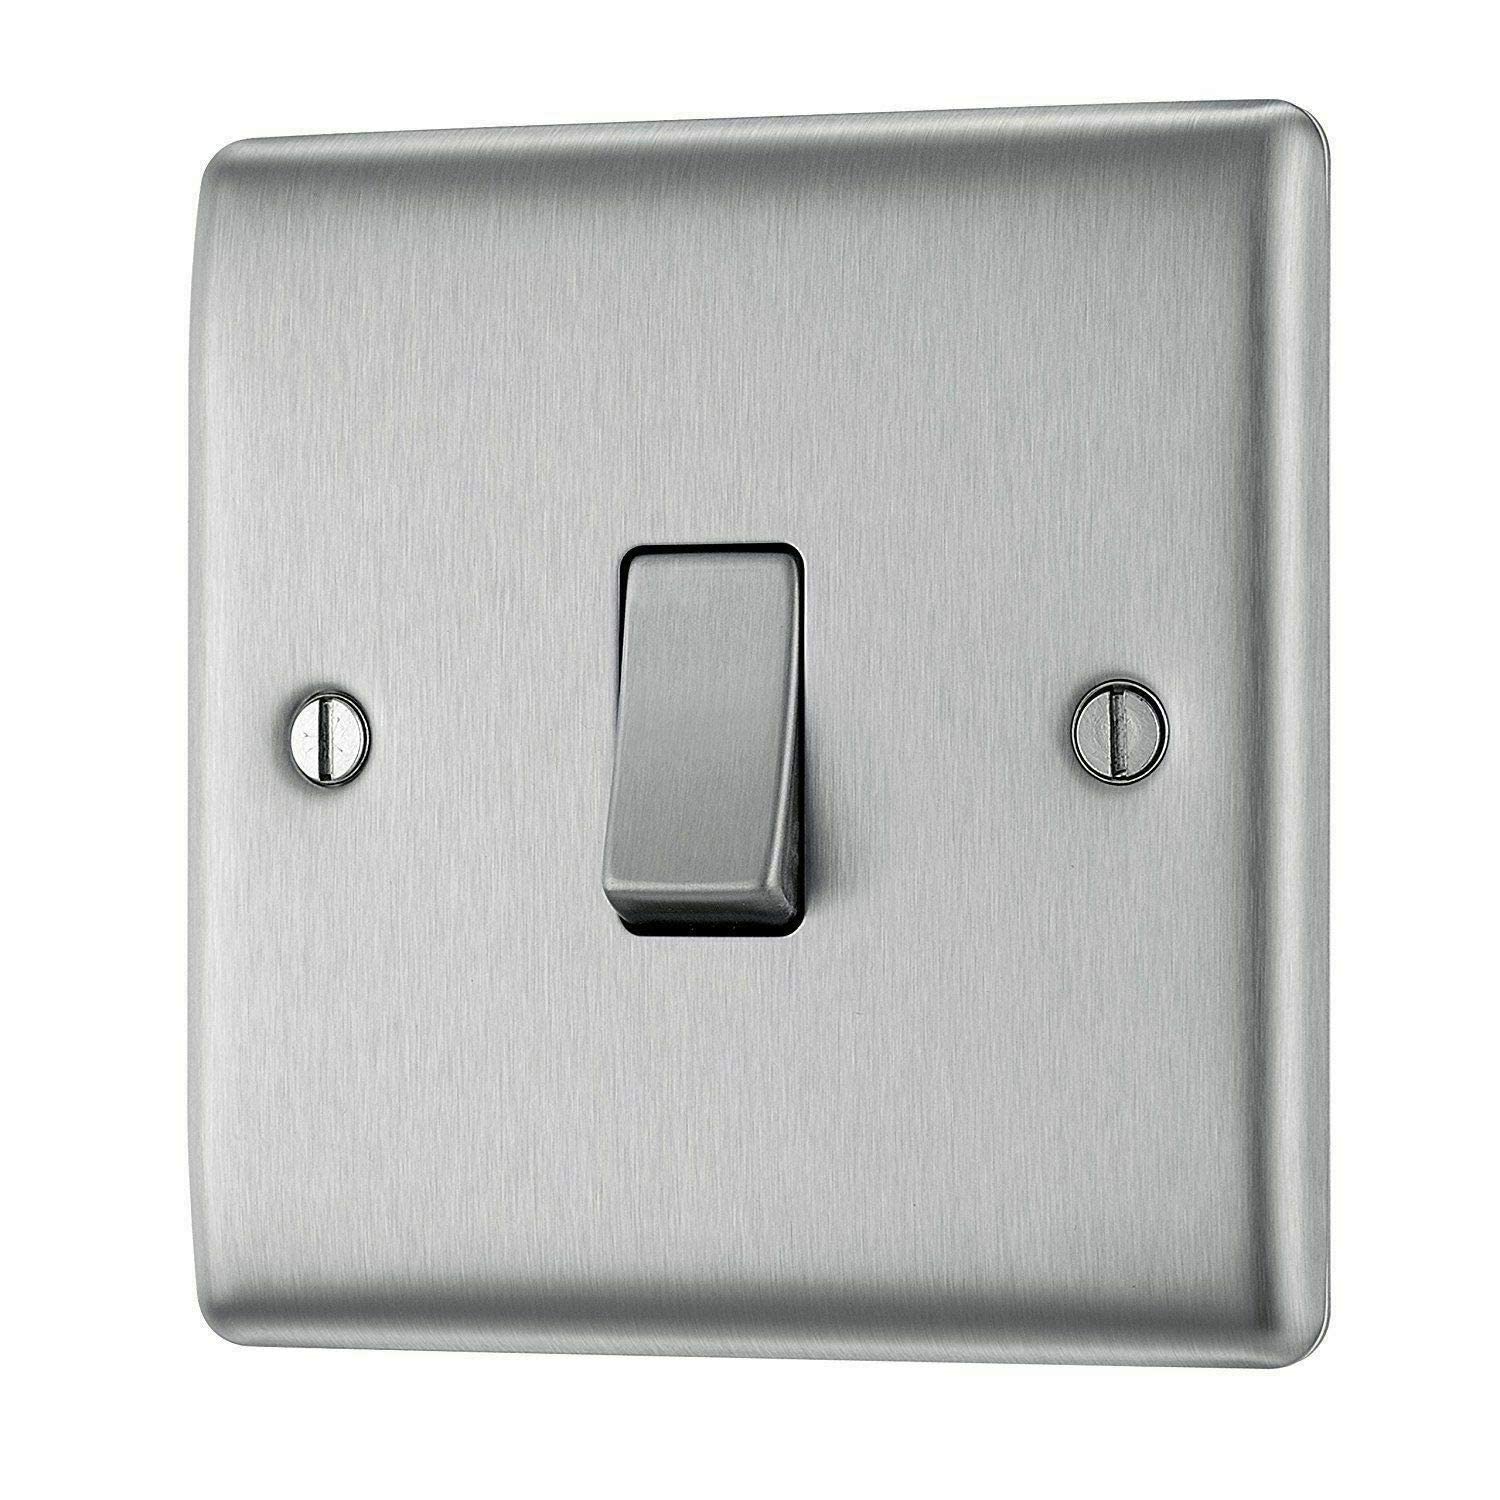 Electric Switches & socket online shop Google images